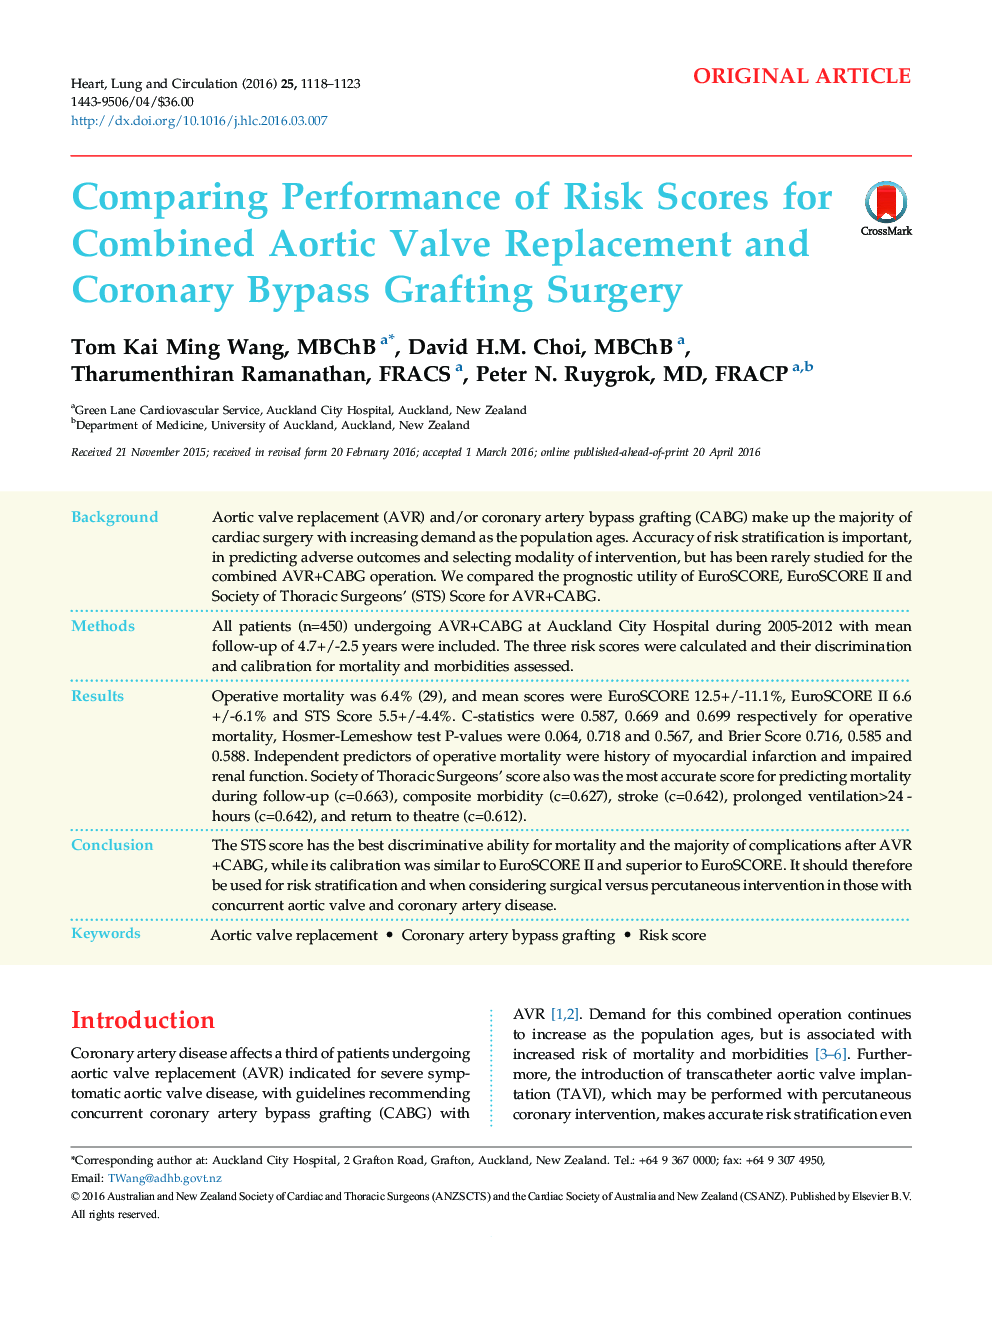 Original ArticleComparing Performance of Risk Scores for Combined Aortic Valve Replacement and Coronary Bypass Grafting Surgery